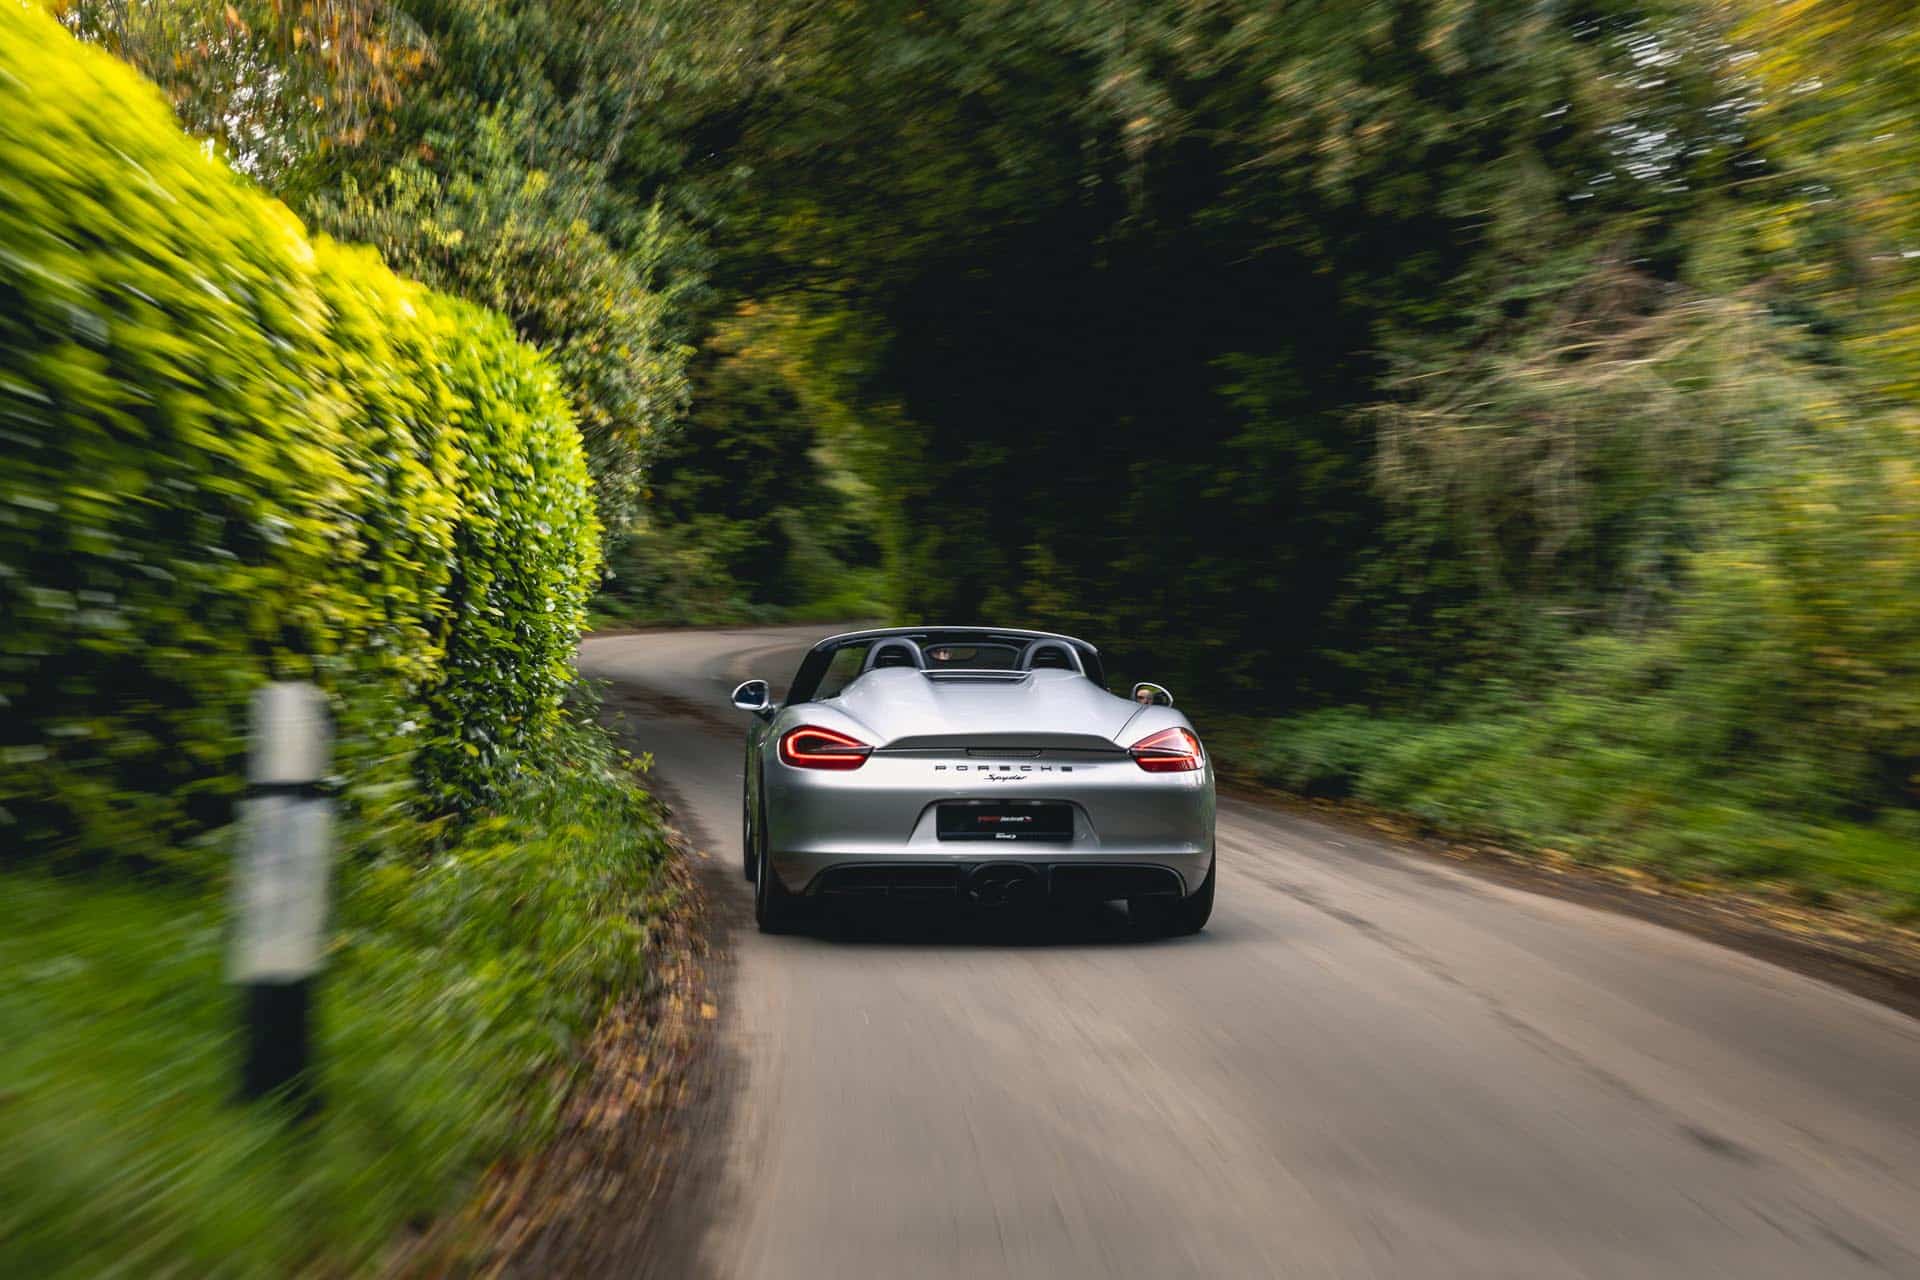 981-boxster-spyder-driving